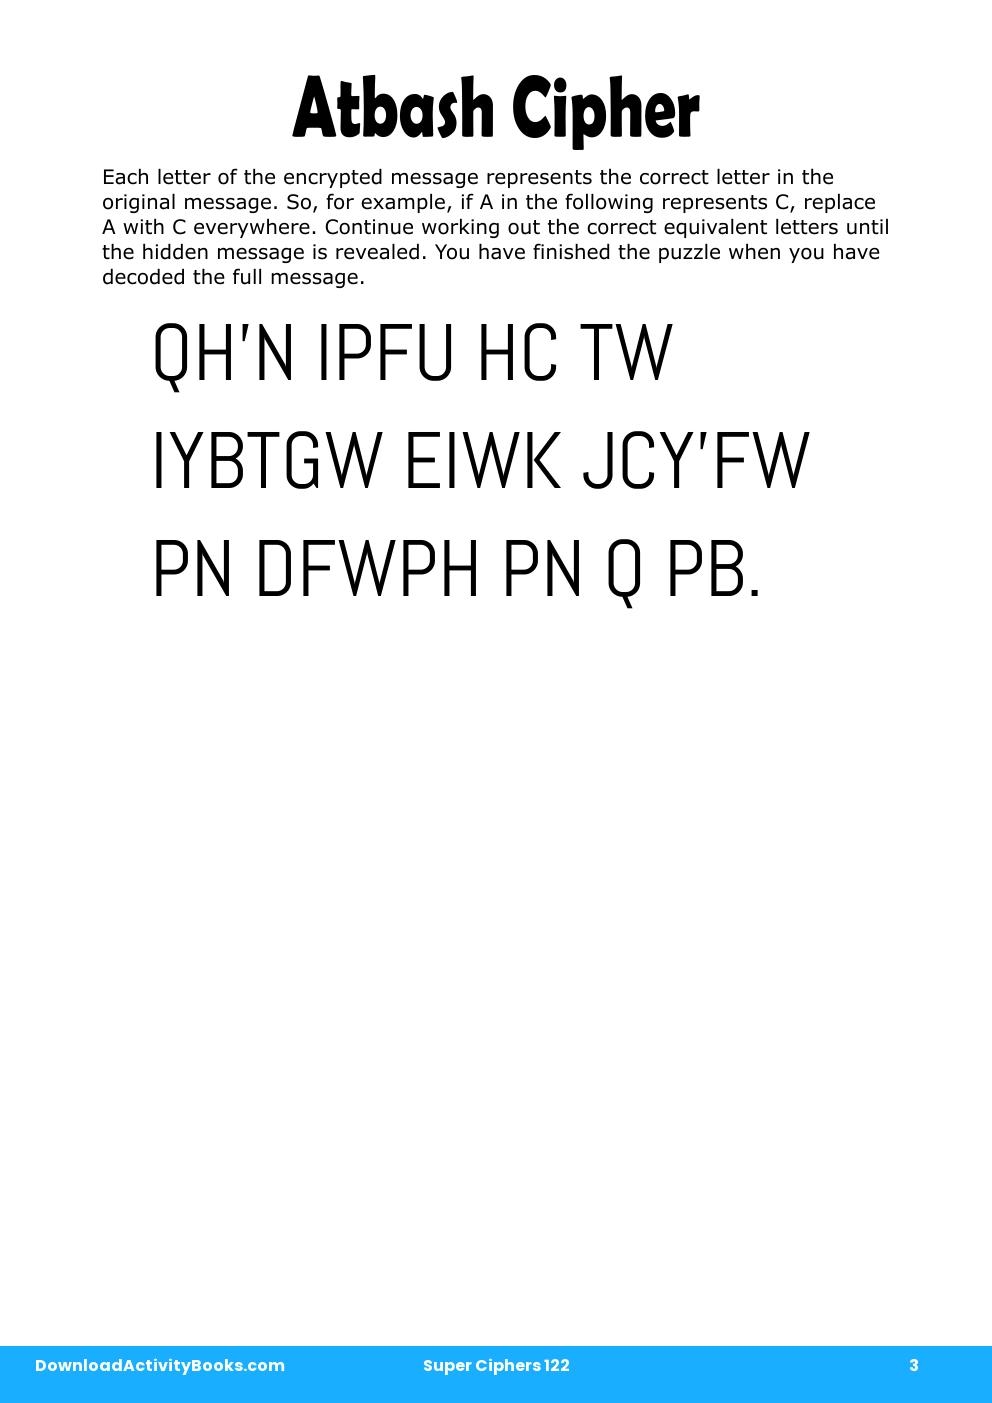 Atbash Cipher in Super Ciphers 122